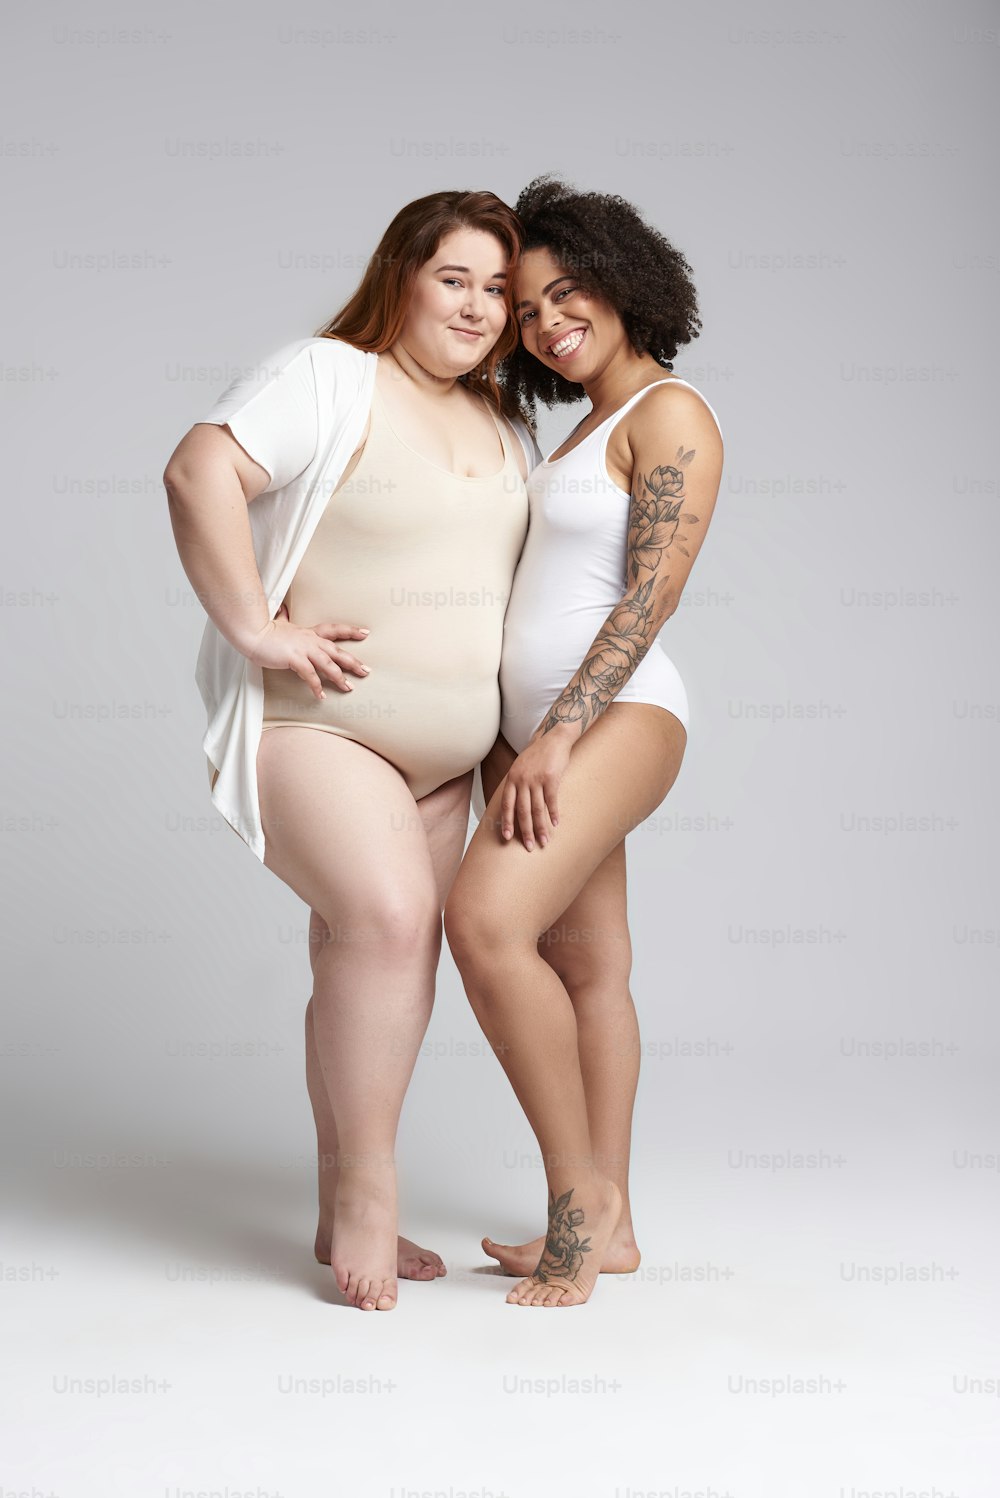 Caucasian woman and Afro American lady smiling and posing for camera. Overweight concept